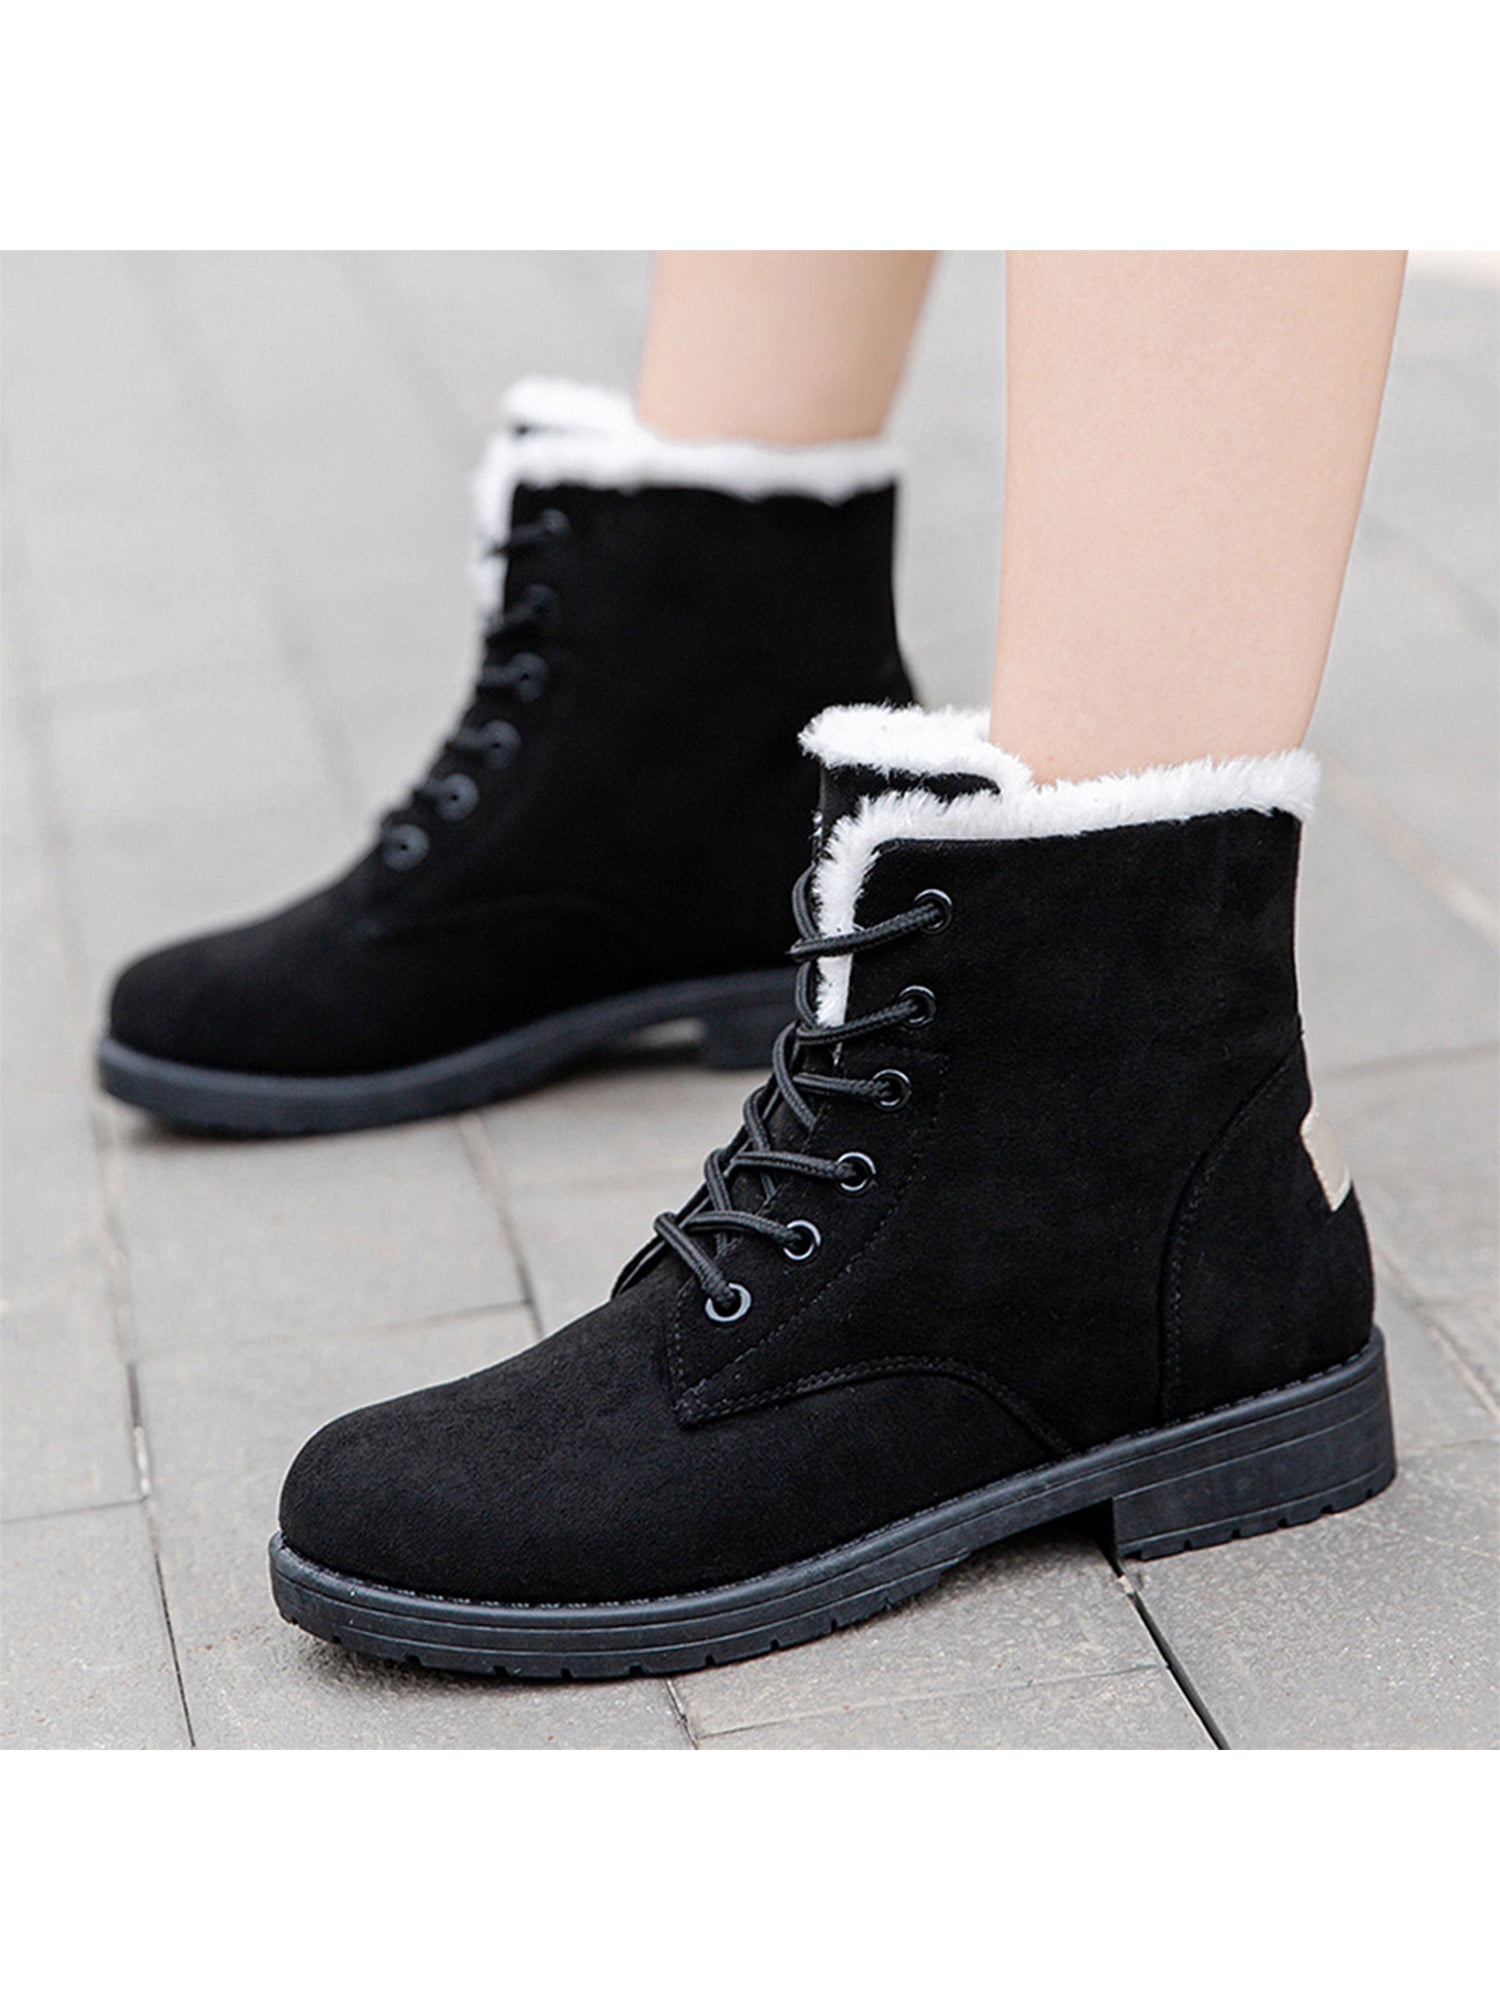 Women's girl  Faux Suede Lace Up flat Winter Warm Snow Ankle Boots Shoes 